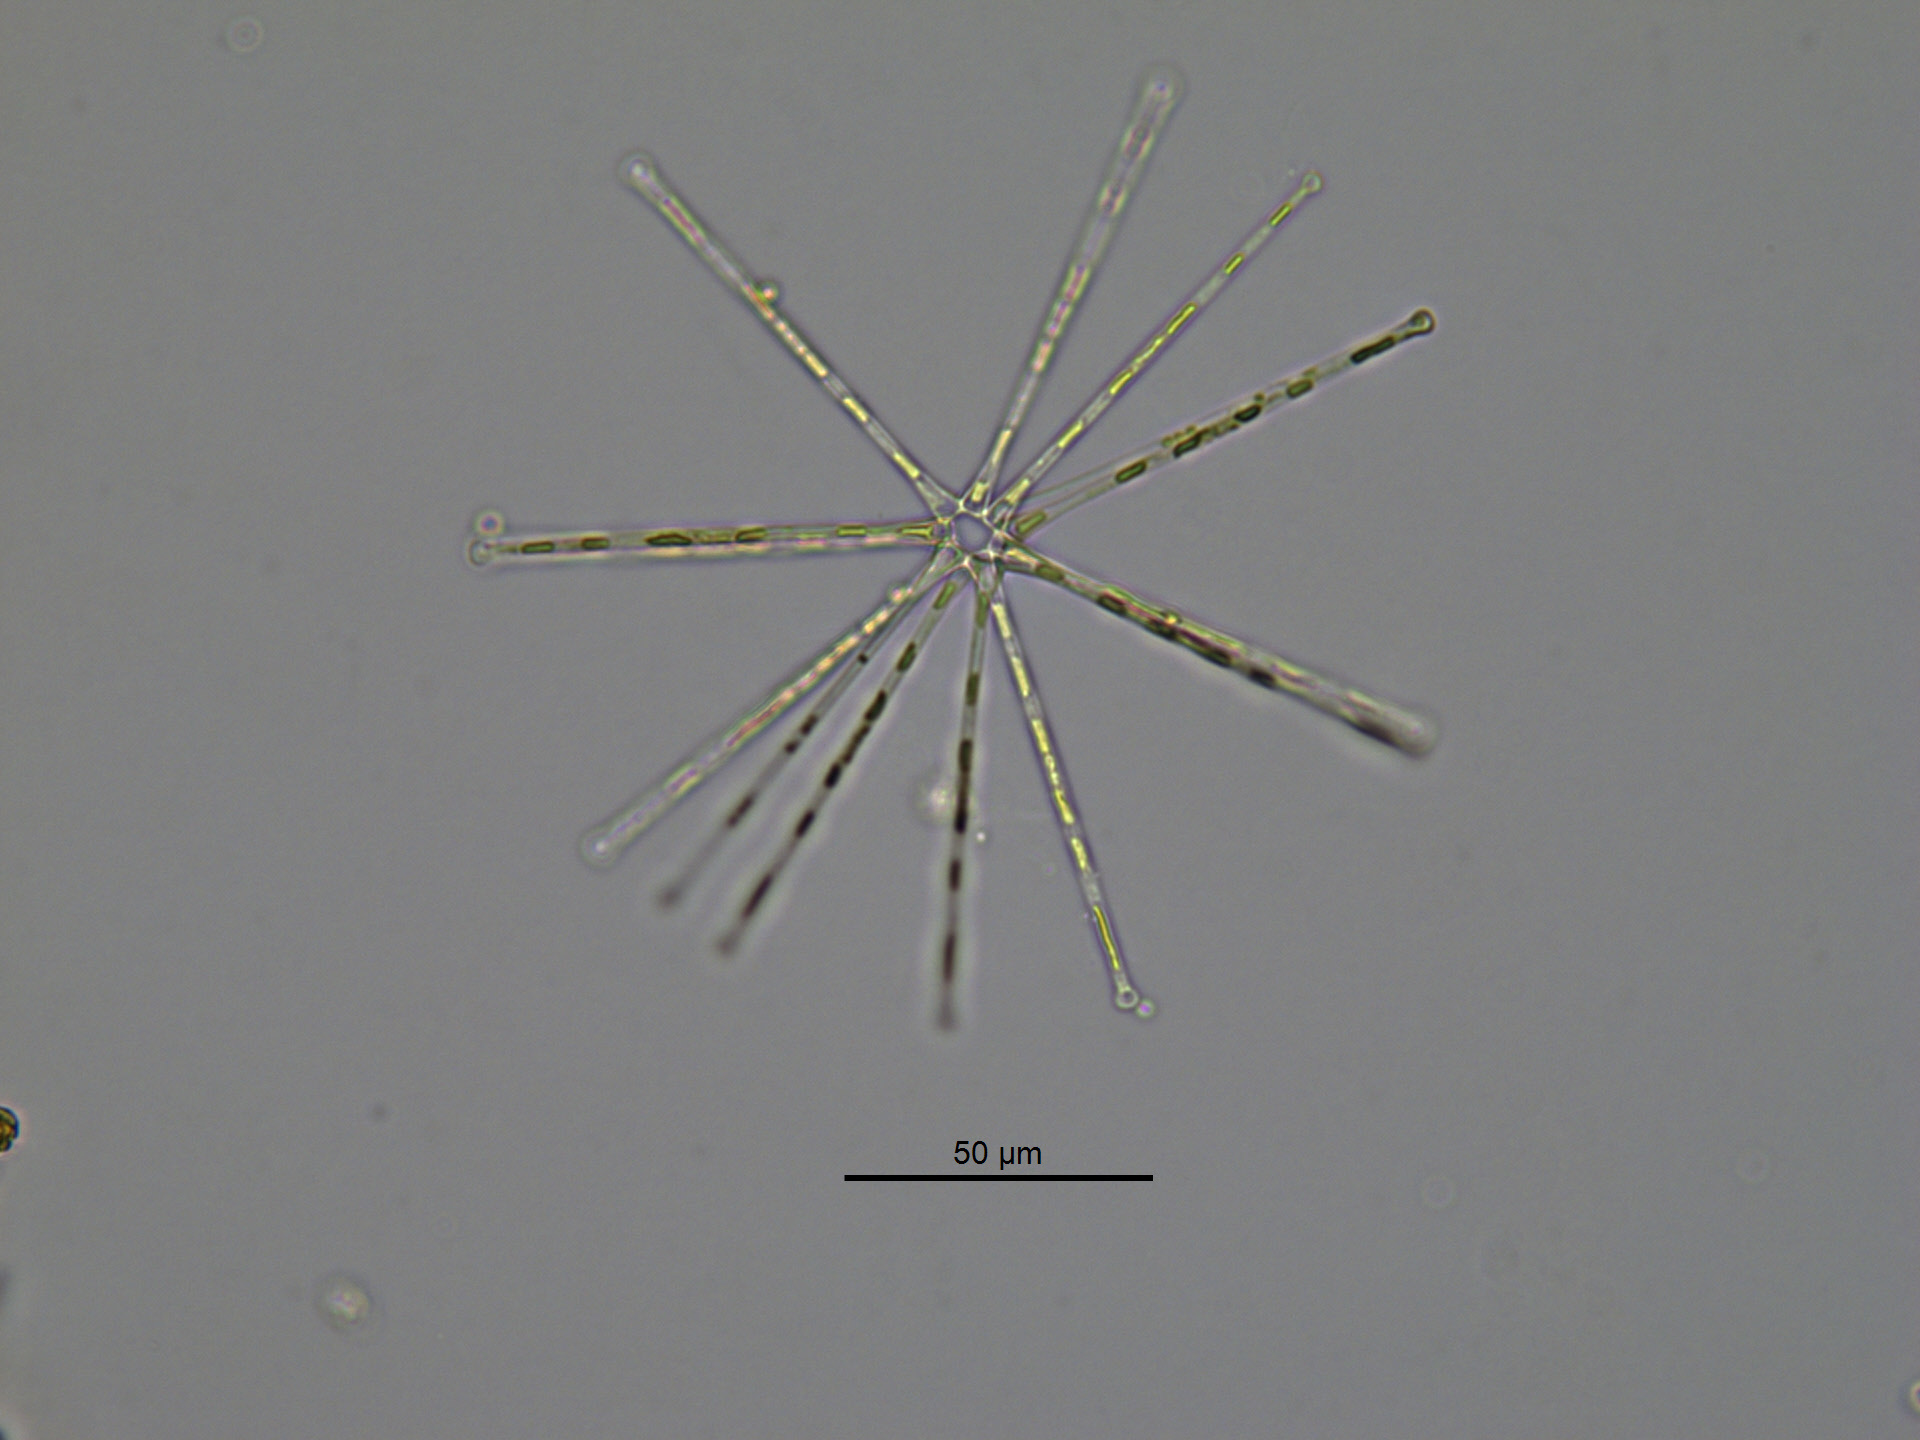 A colony of long, thin diatoms forming a three dimensional star shape